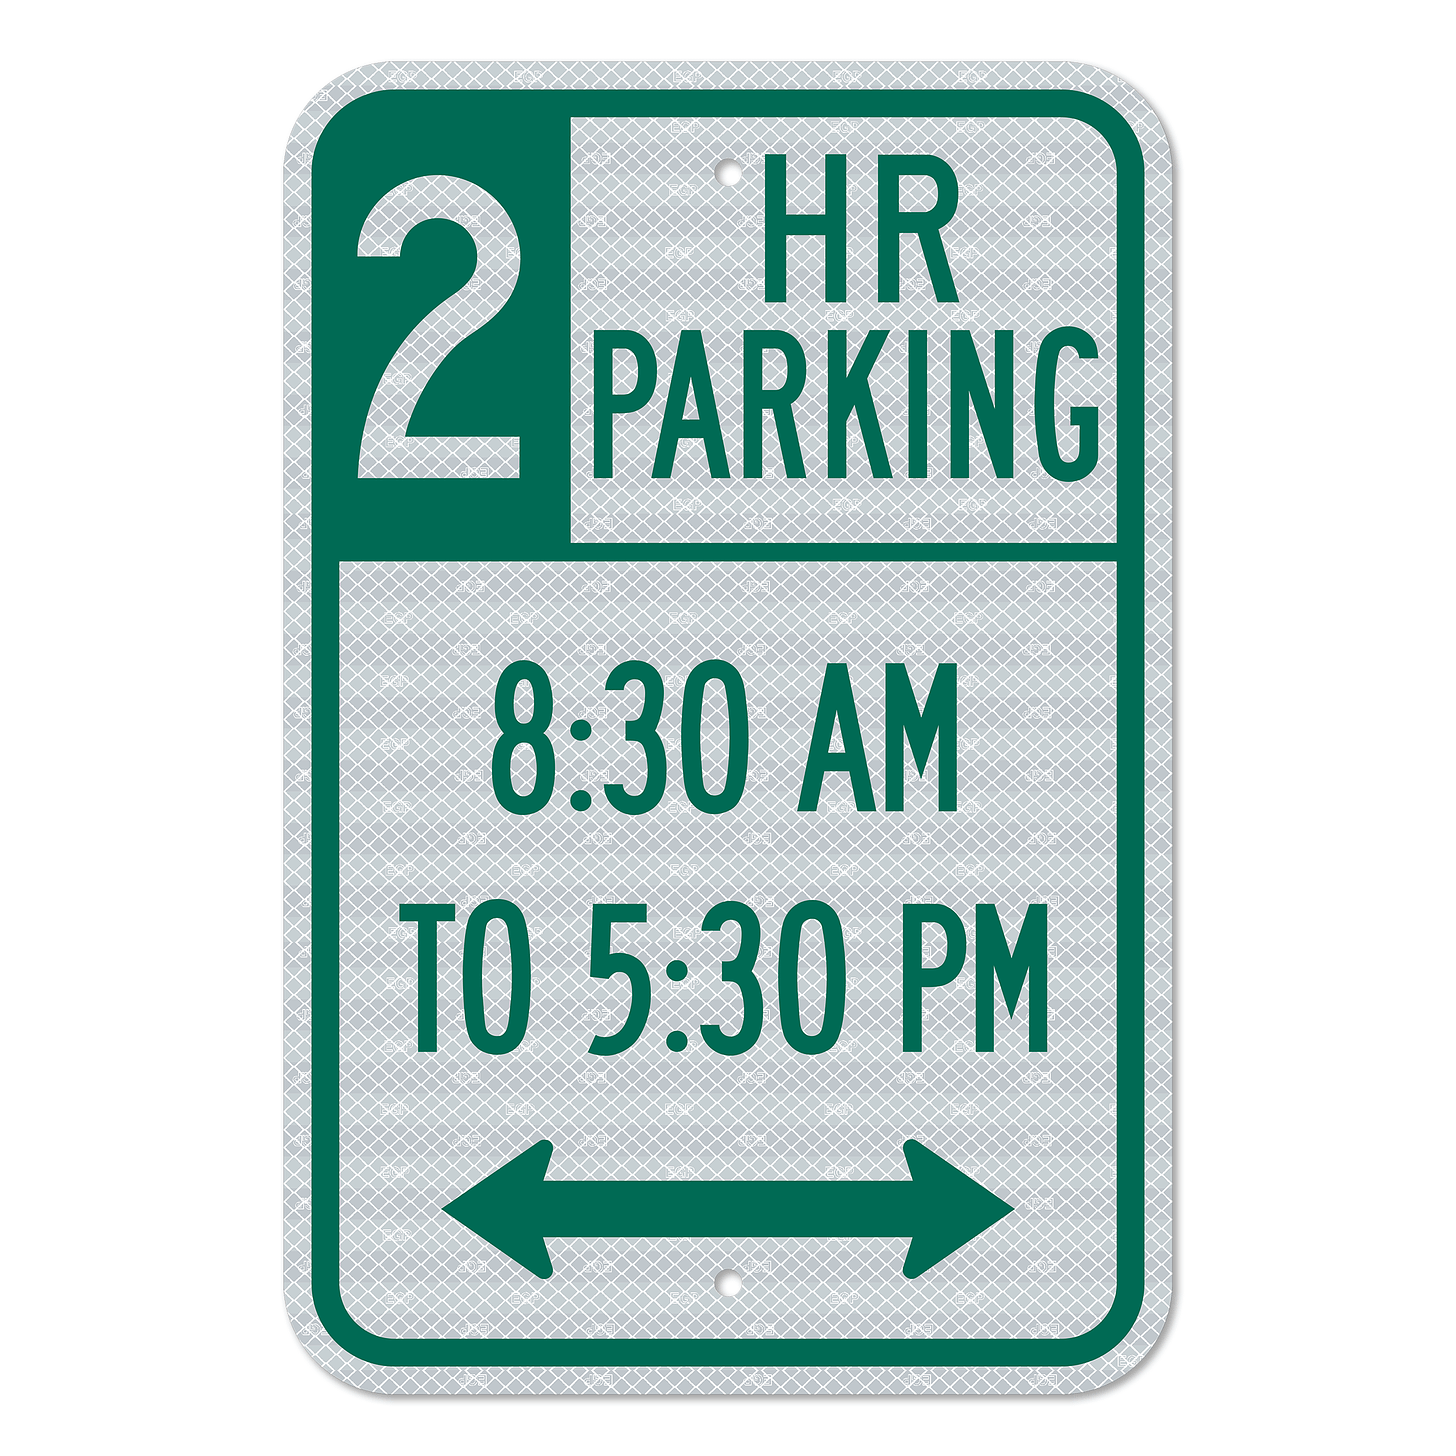 2 HR Parking with Double Arrow :: Regulatory Parking Signs :: Parking Signs  :: Signs